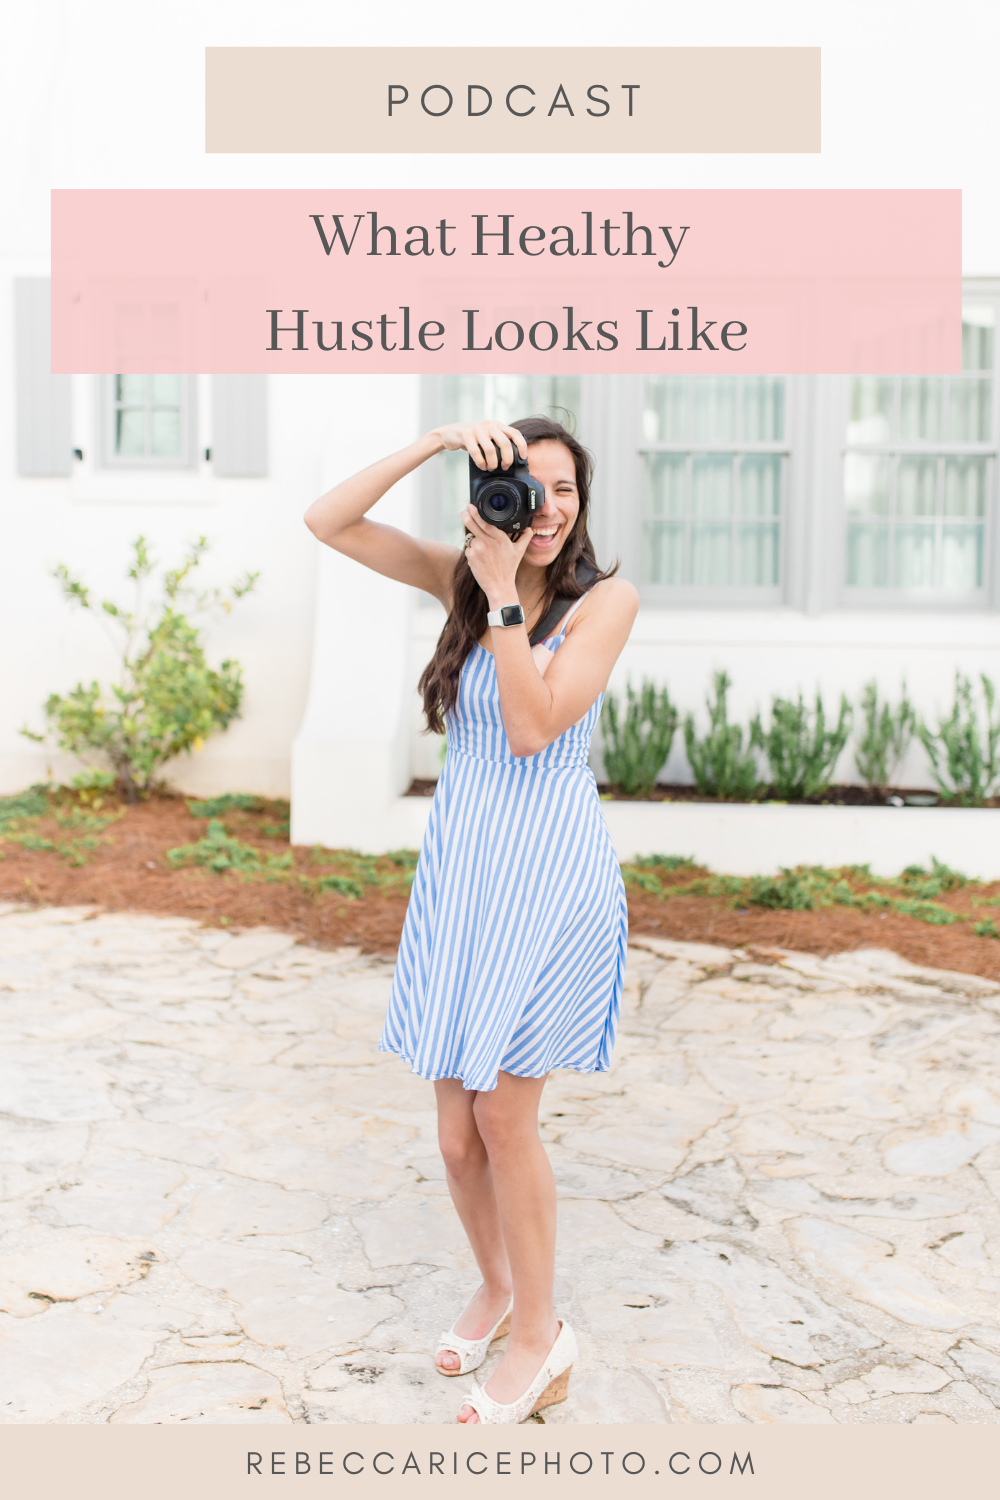 What Healthy Hustle looks like for small business owners shared on the Business Journey Podcast by Rebecca Rice